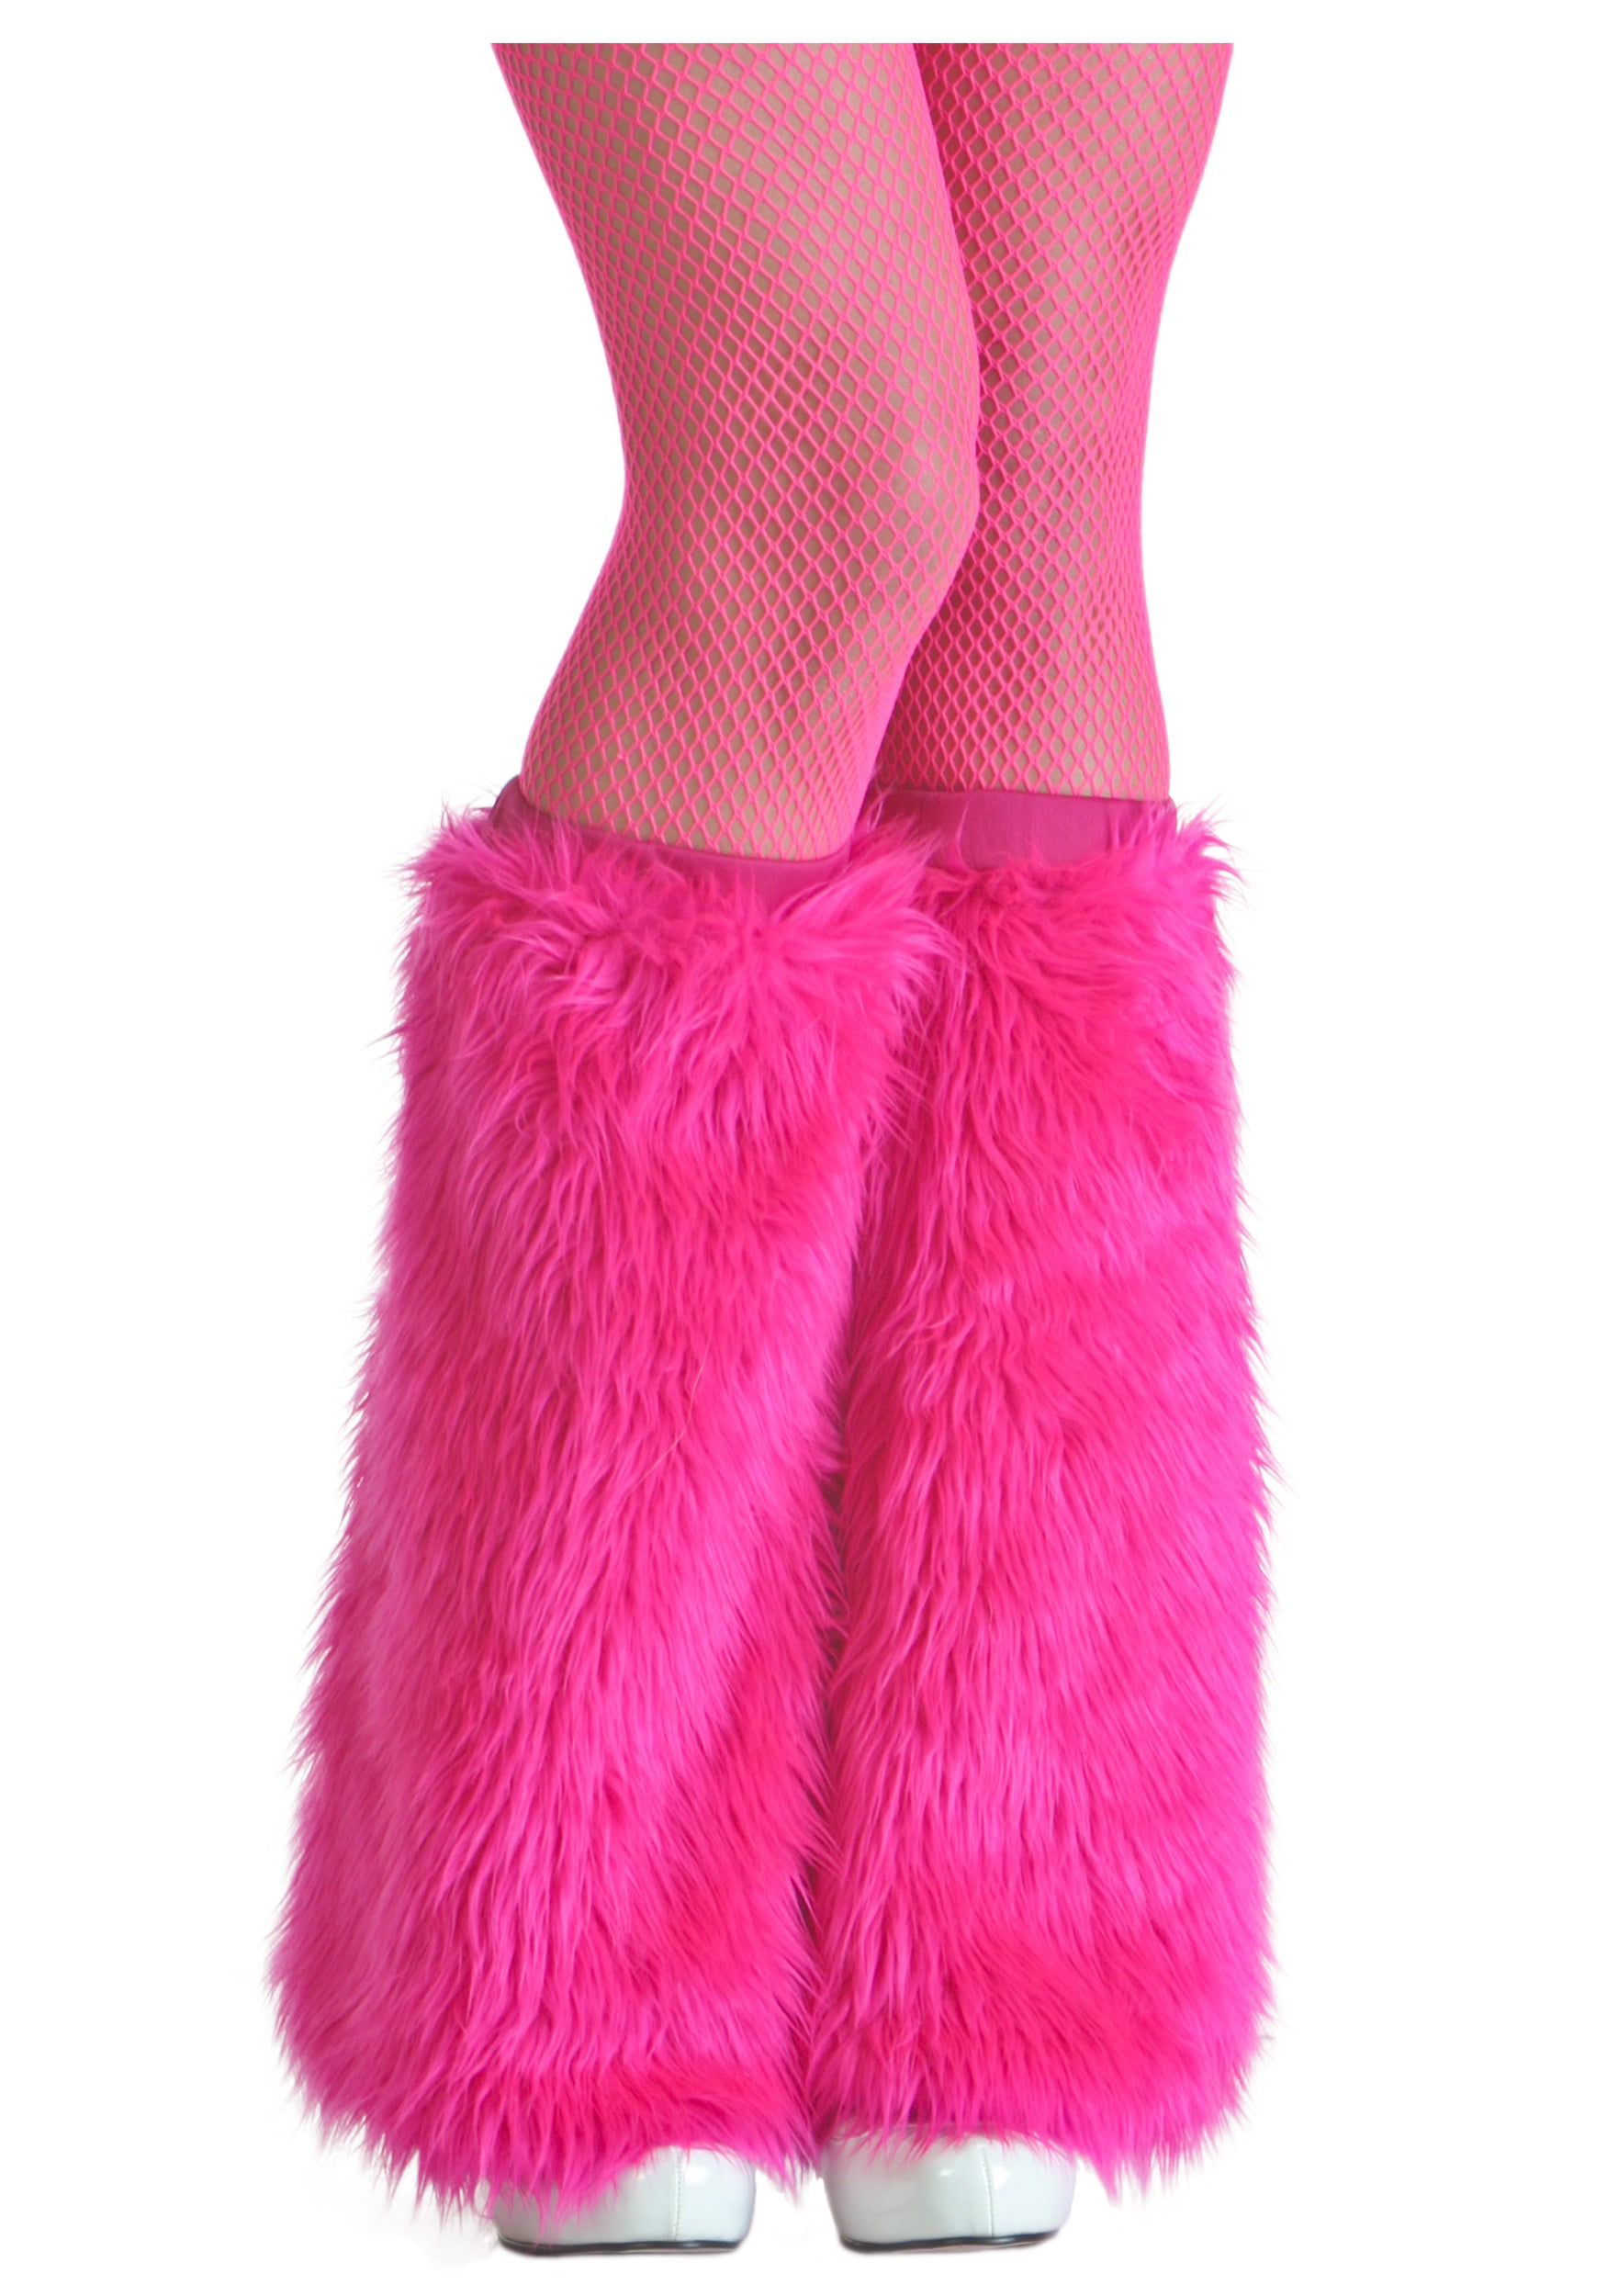 Allie Boot Cuffs .. Fur boot cuffs Valentine/'s shoes white fur boots fur boot covers Pink PomPon . pageant boot covers winter boots